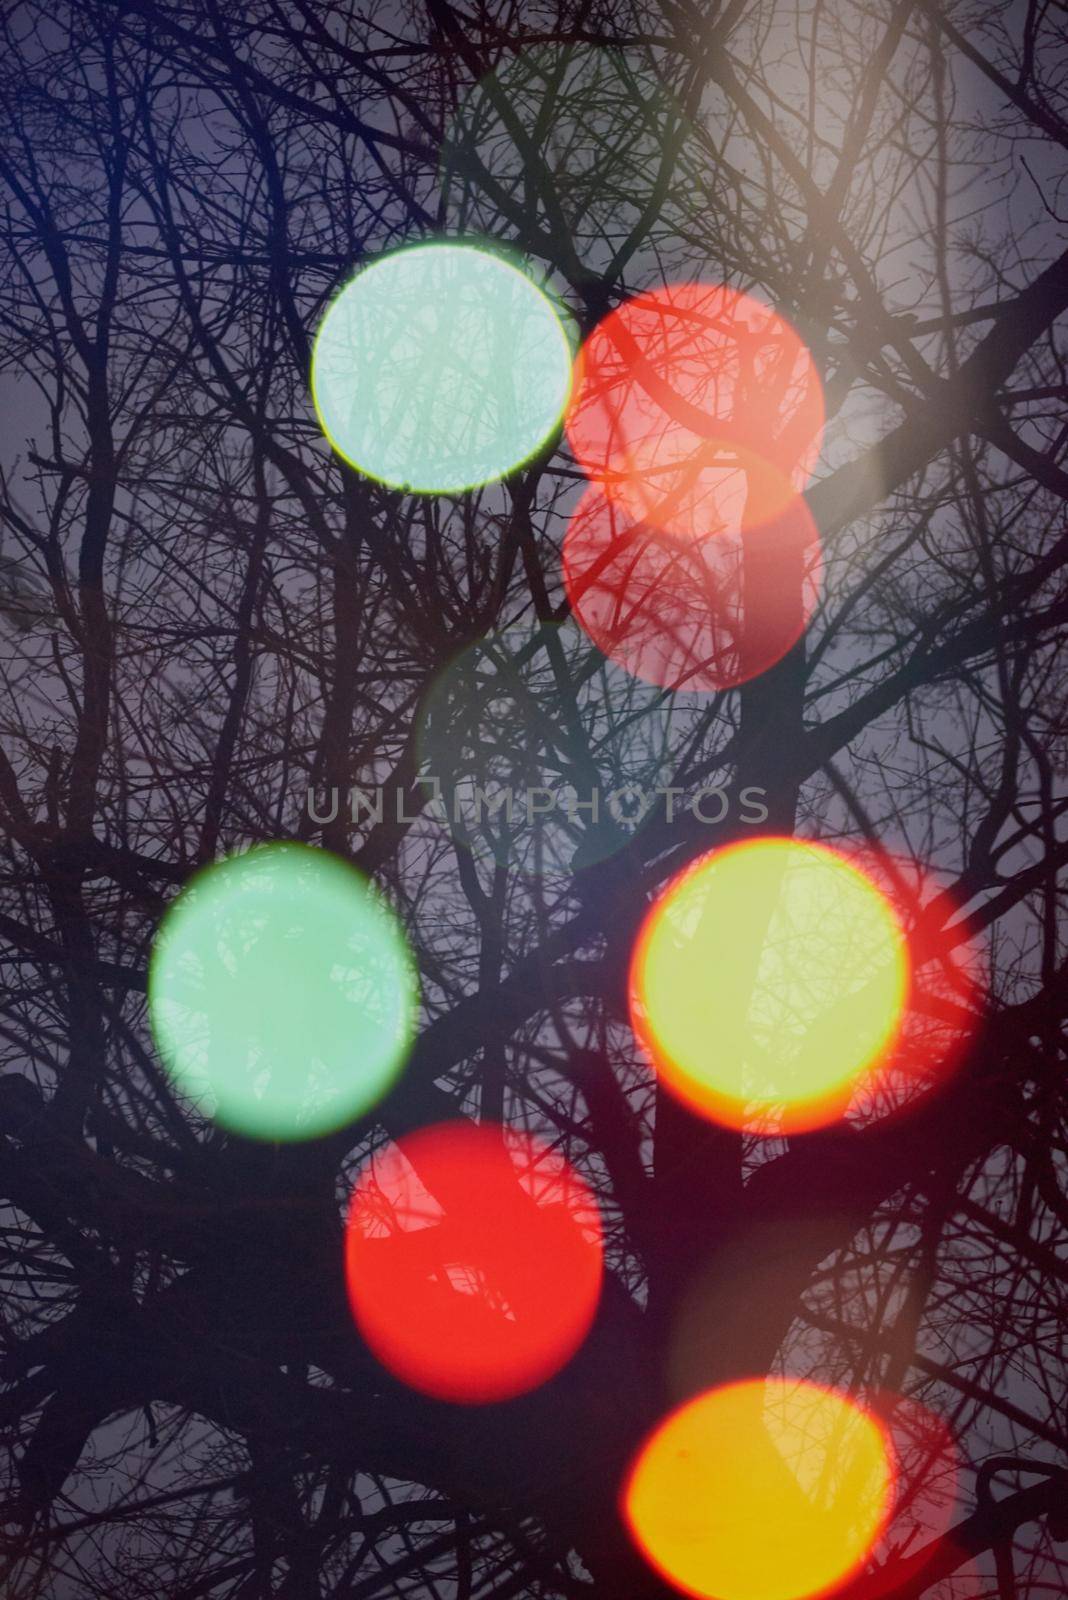 abstract tree background  with blured street  lights and double exposure